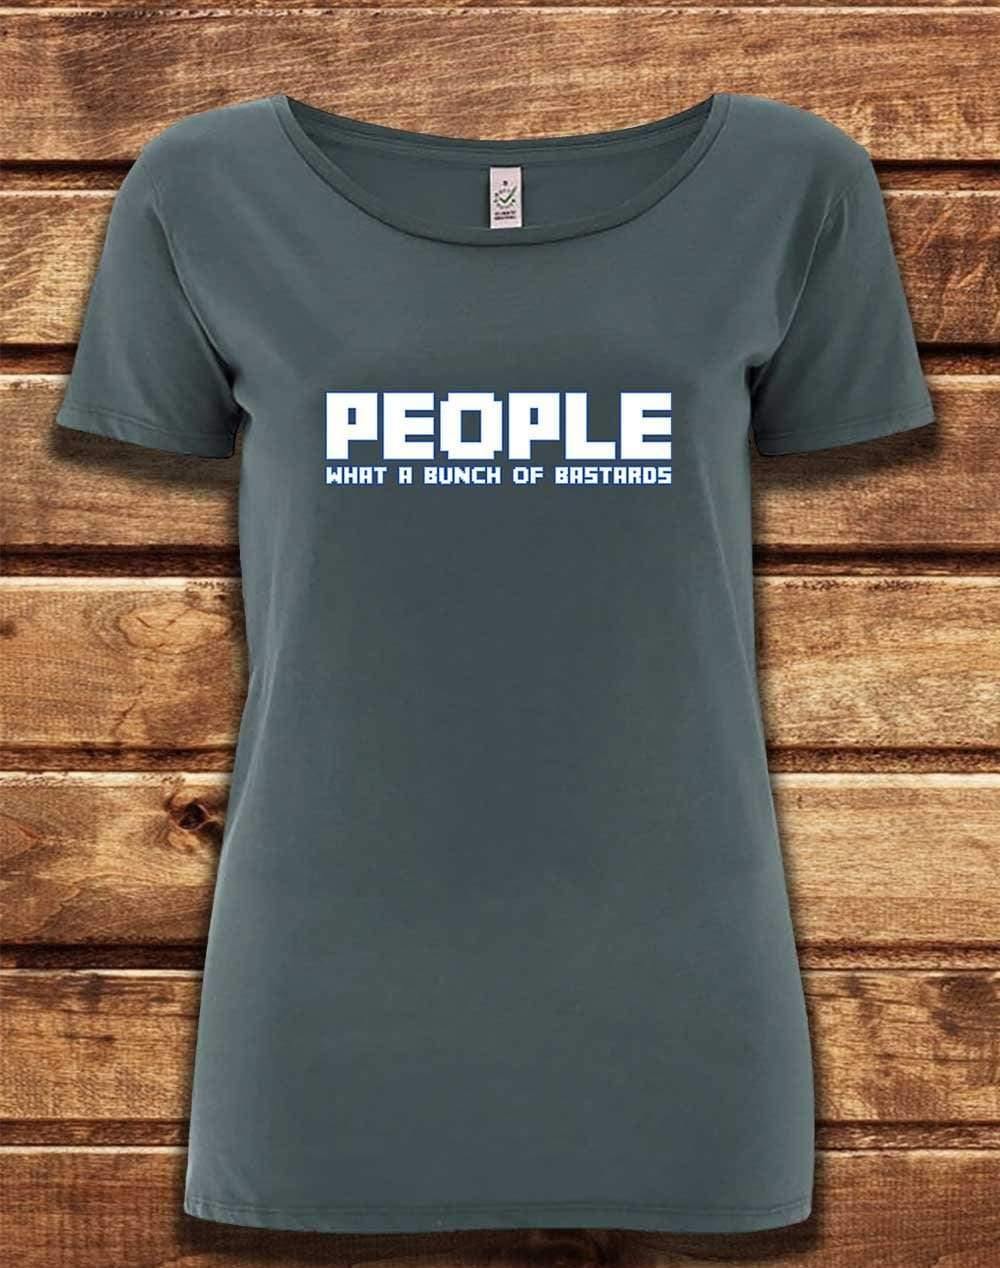 DELUXE People = Bastards Organic Scoop Neck T-Shirt 8-10 / Light Charcoal  - Off World Tees